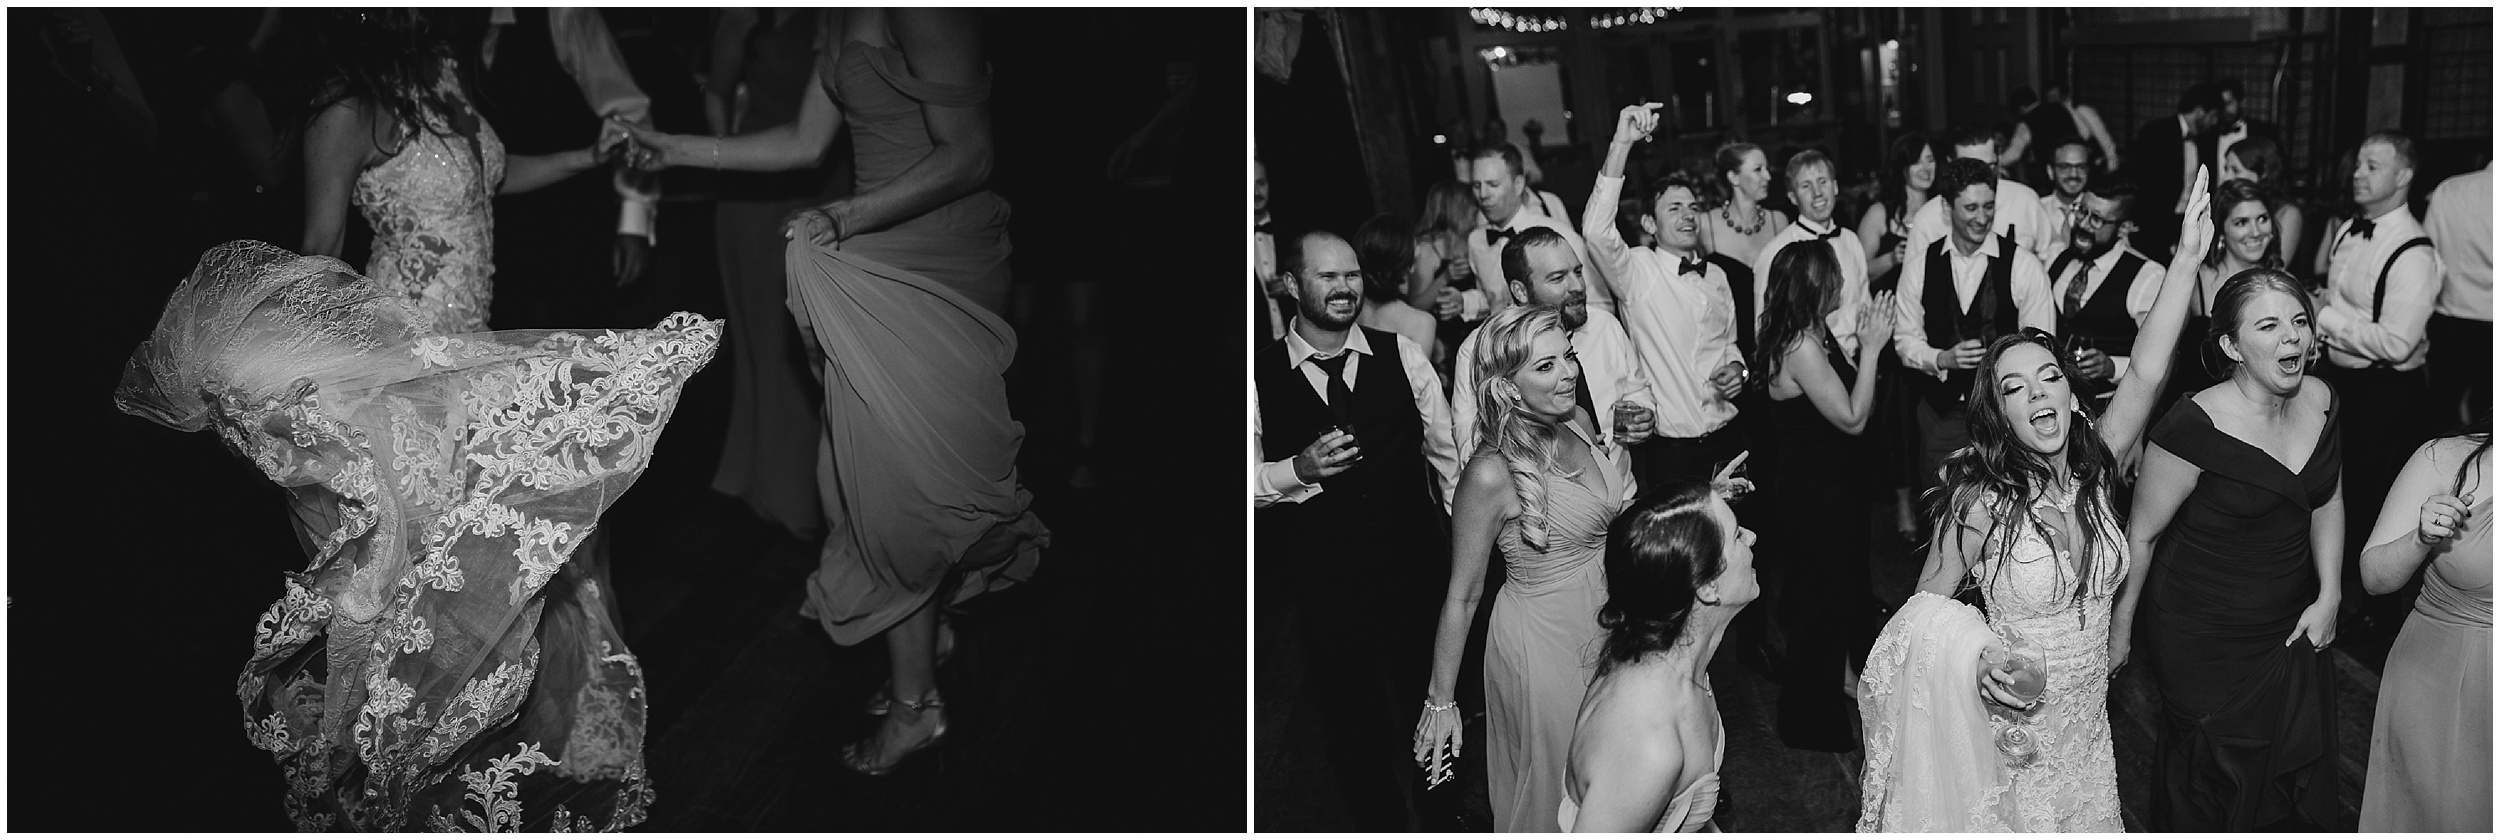 a bride and groom dance during their wedding reception at city winery in new york city, new york